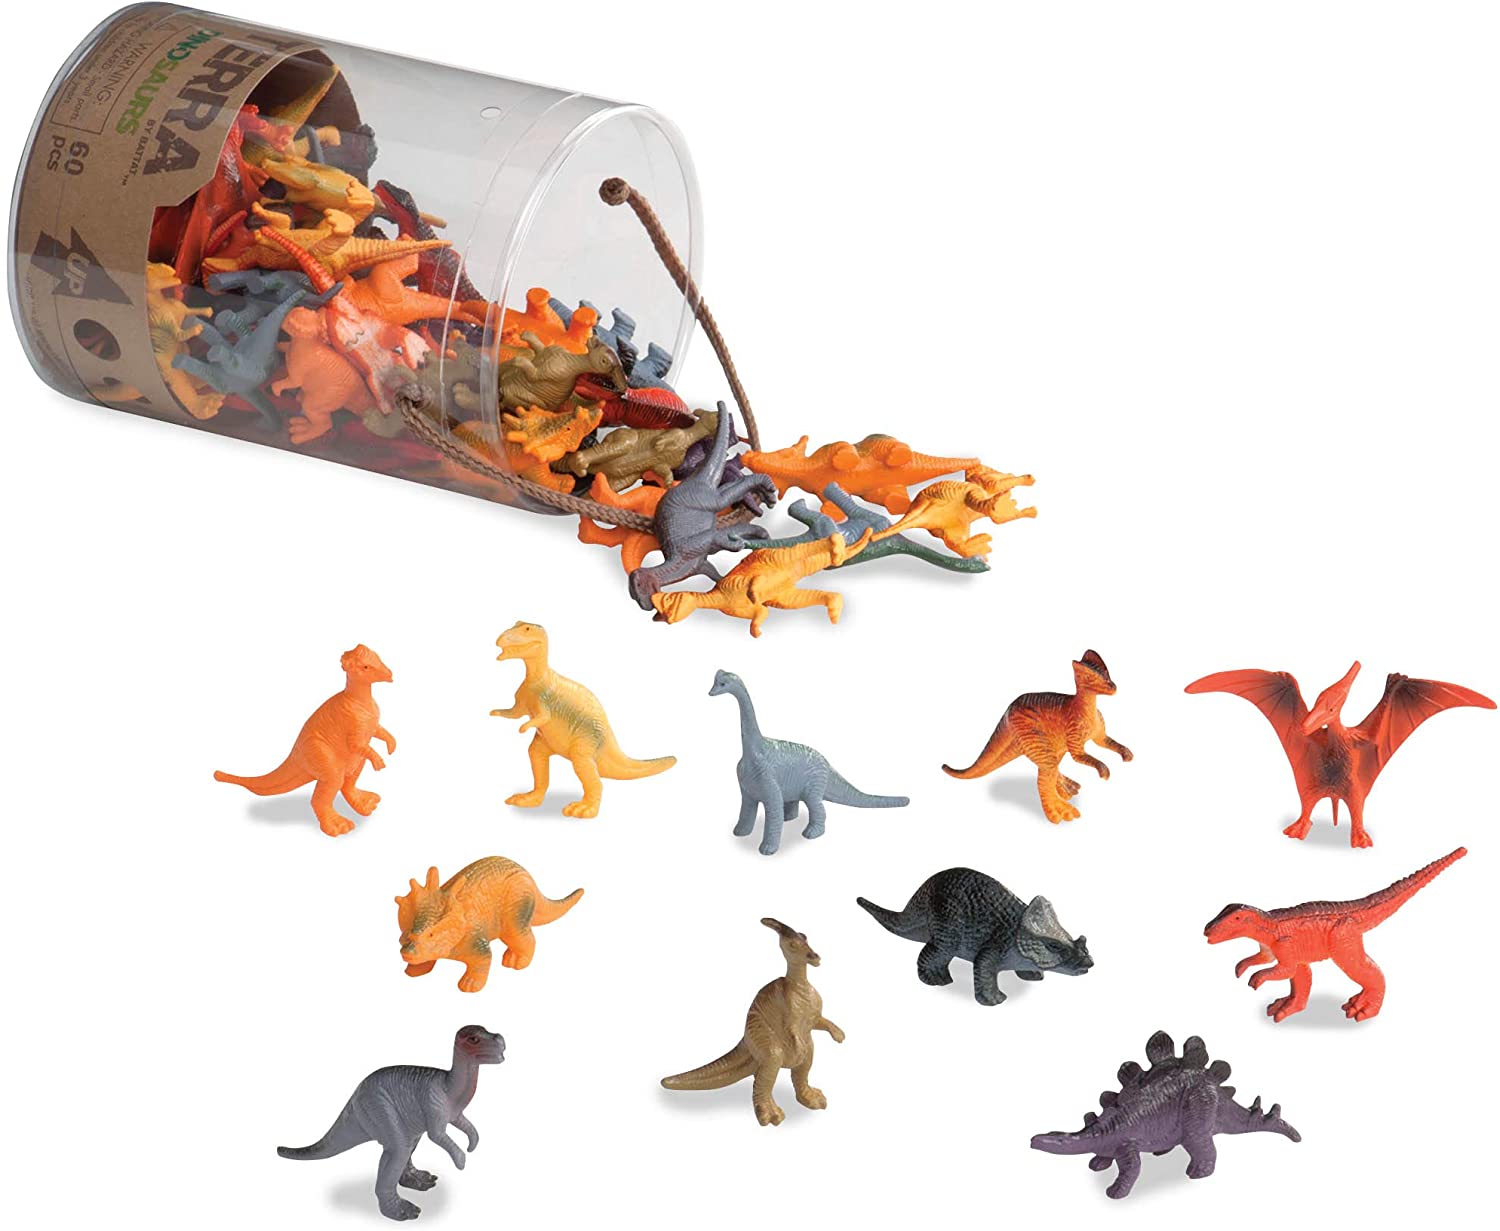 HE1546036 - battat Miniature Dinosaurs in a Tube - Pack of 60 | Findel ...